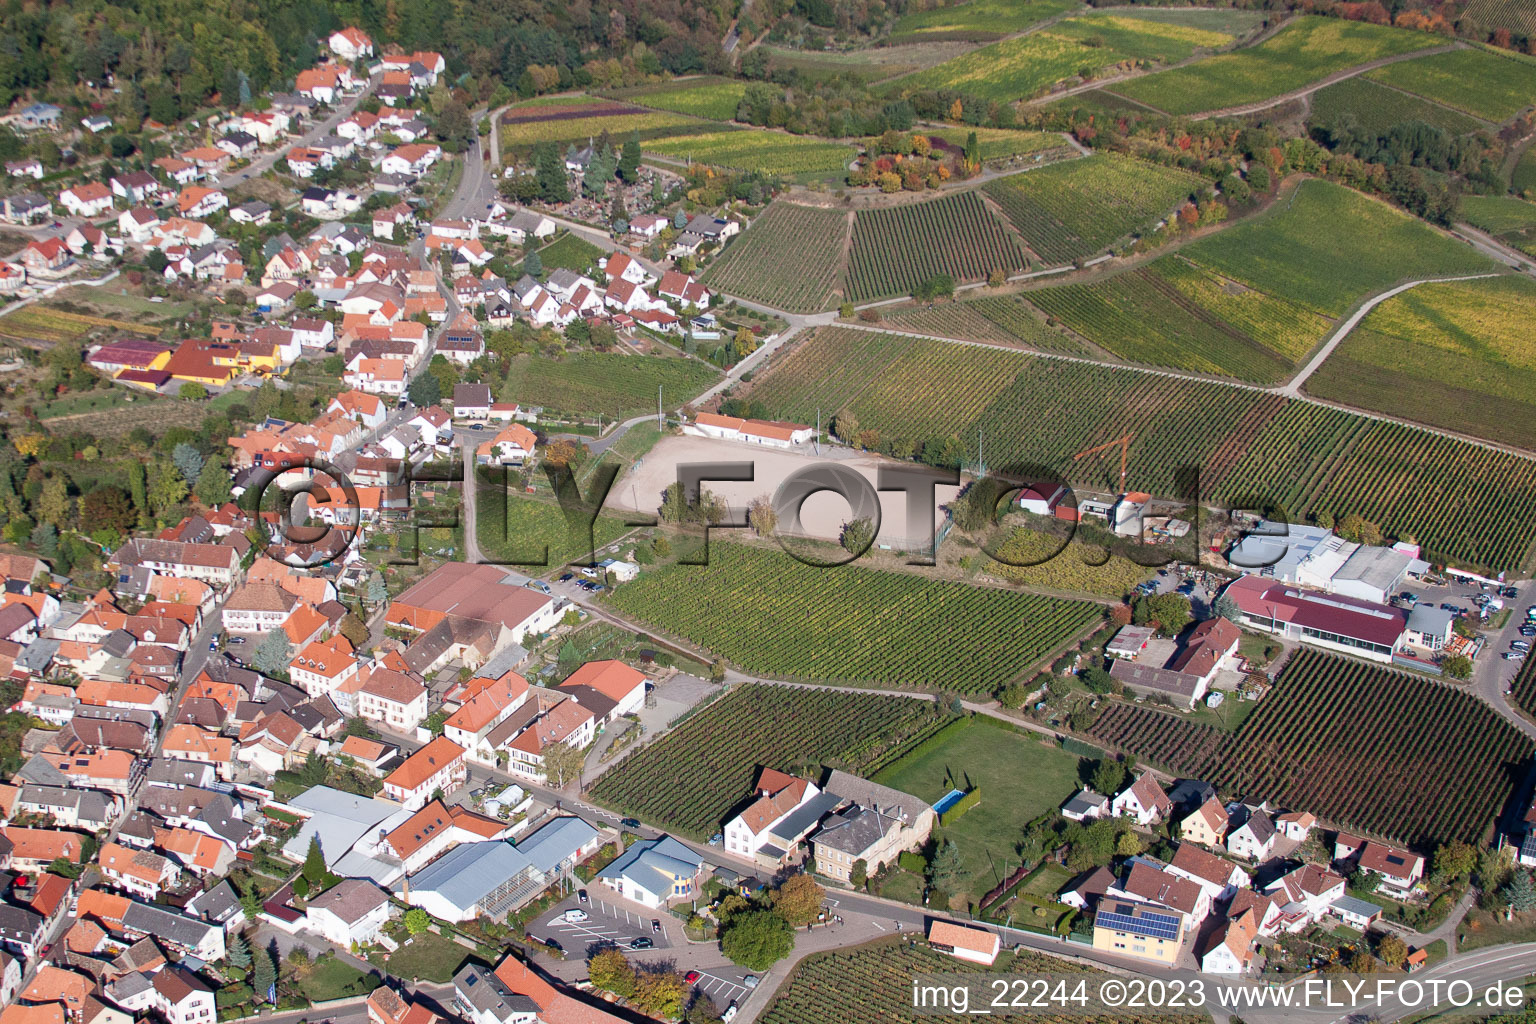 Burrweiler in the state Rhineland-Palatinate, Germany seen from above